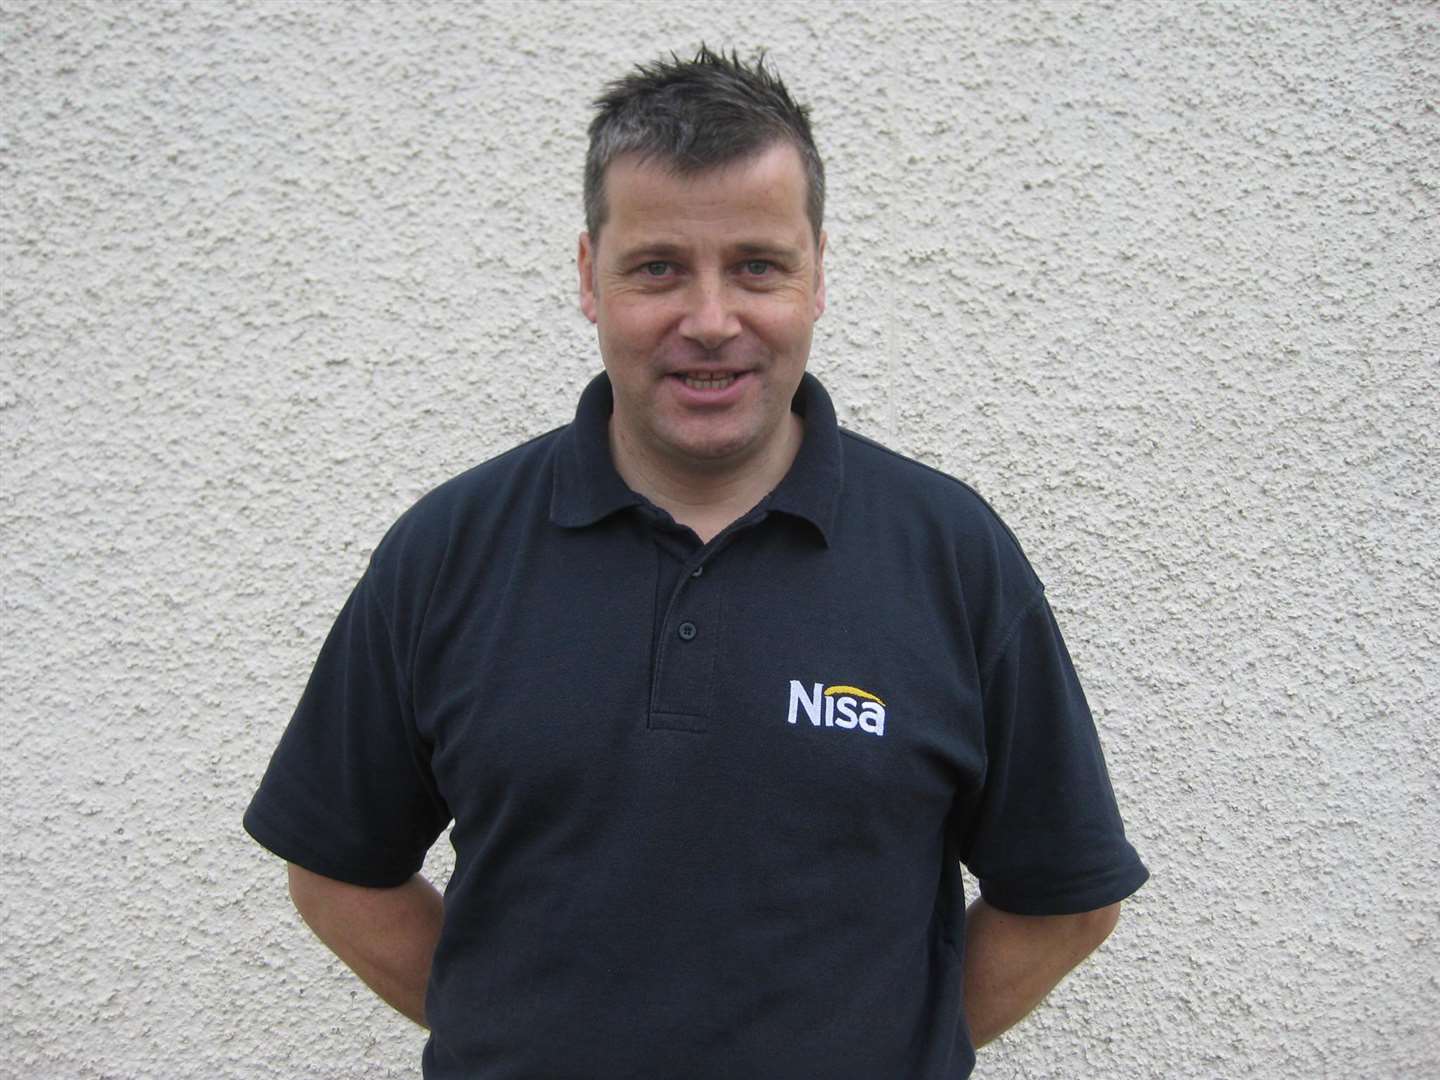 Retailer John Murray is shortly to open a Nisa store at Dornoch Business Park.